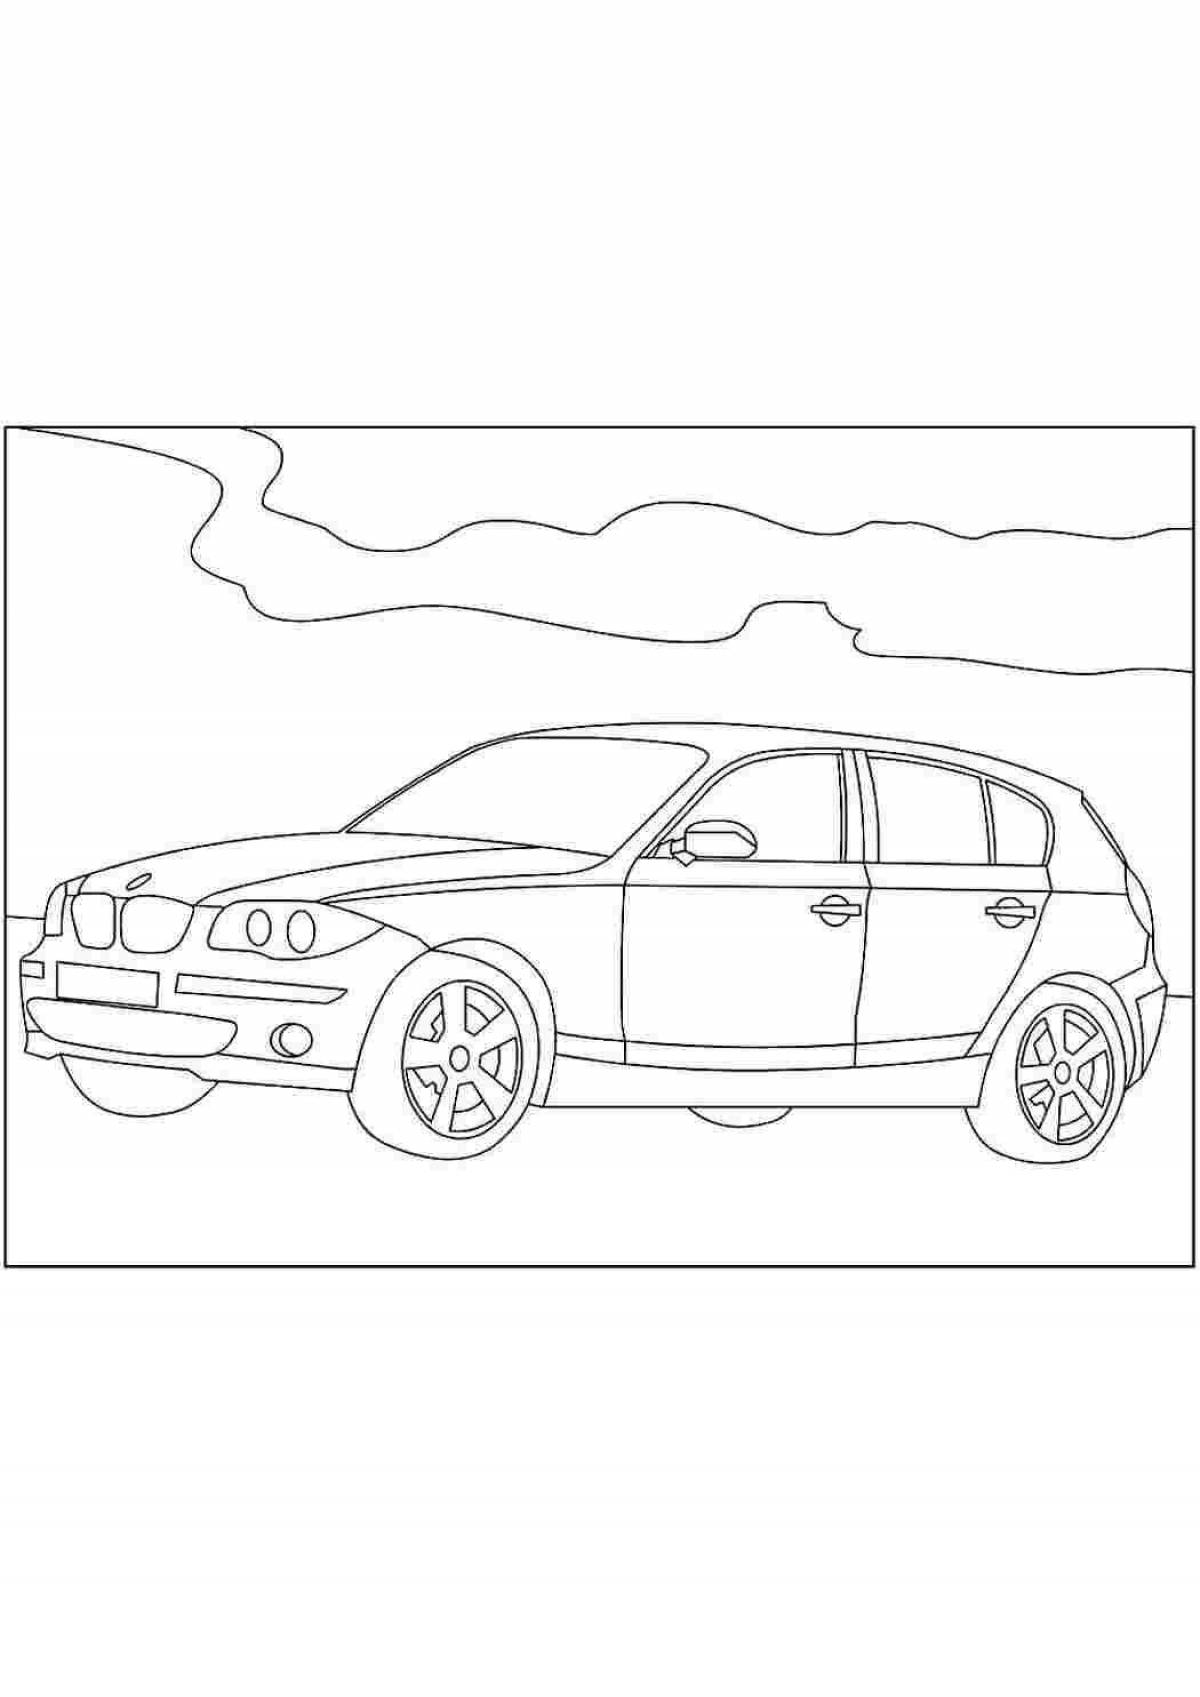 Coloring majestic bmw 5 series